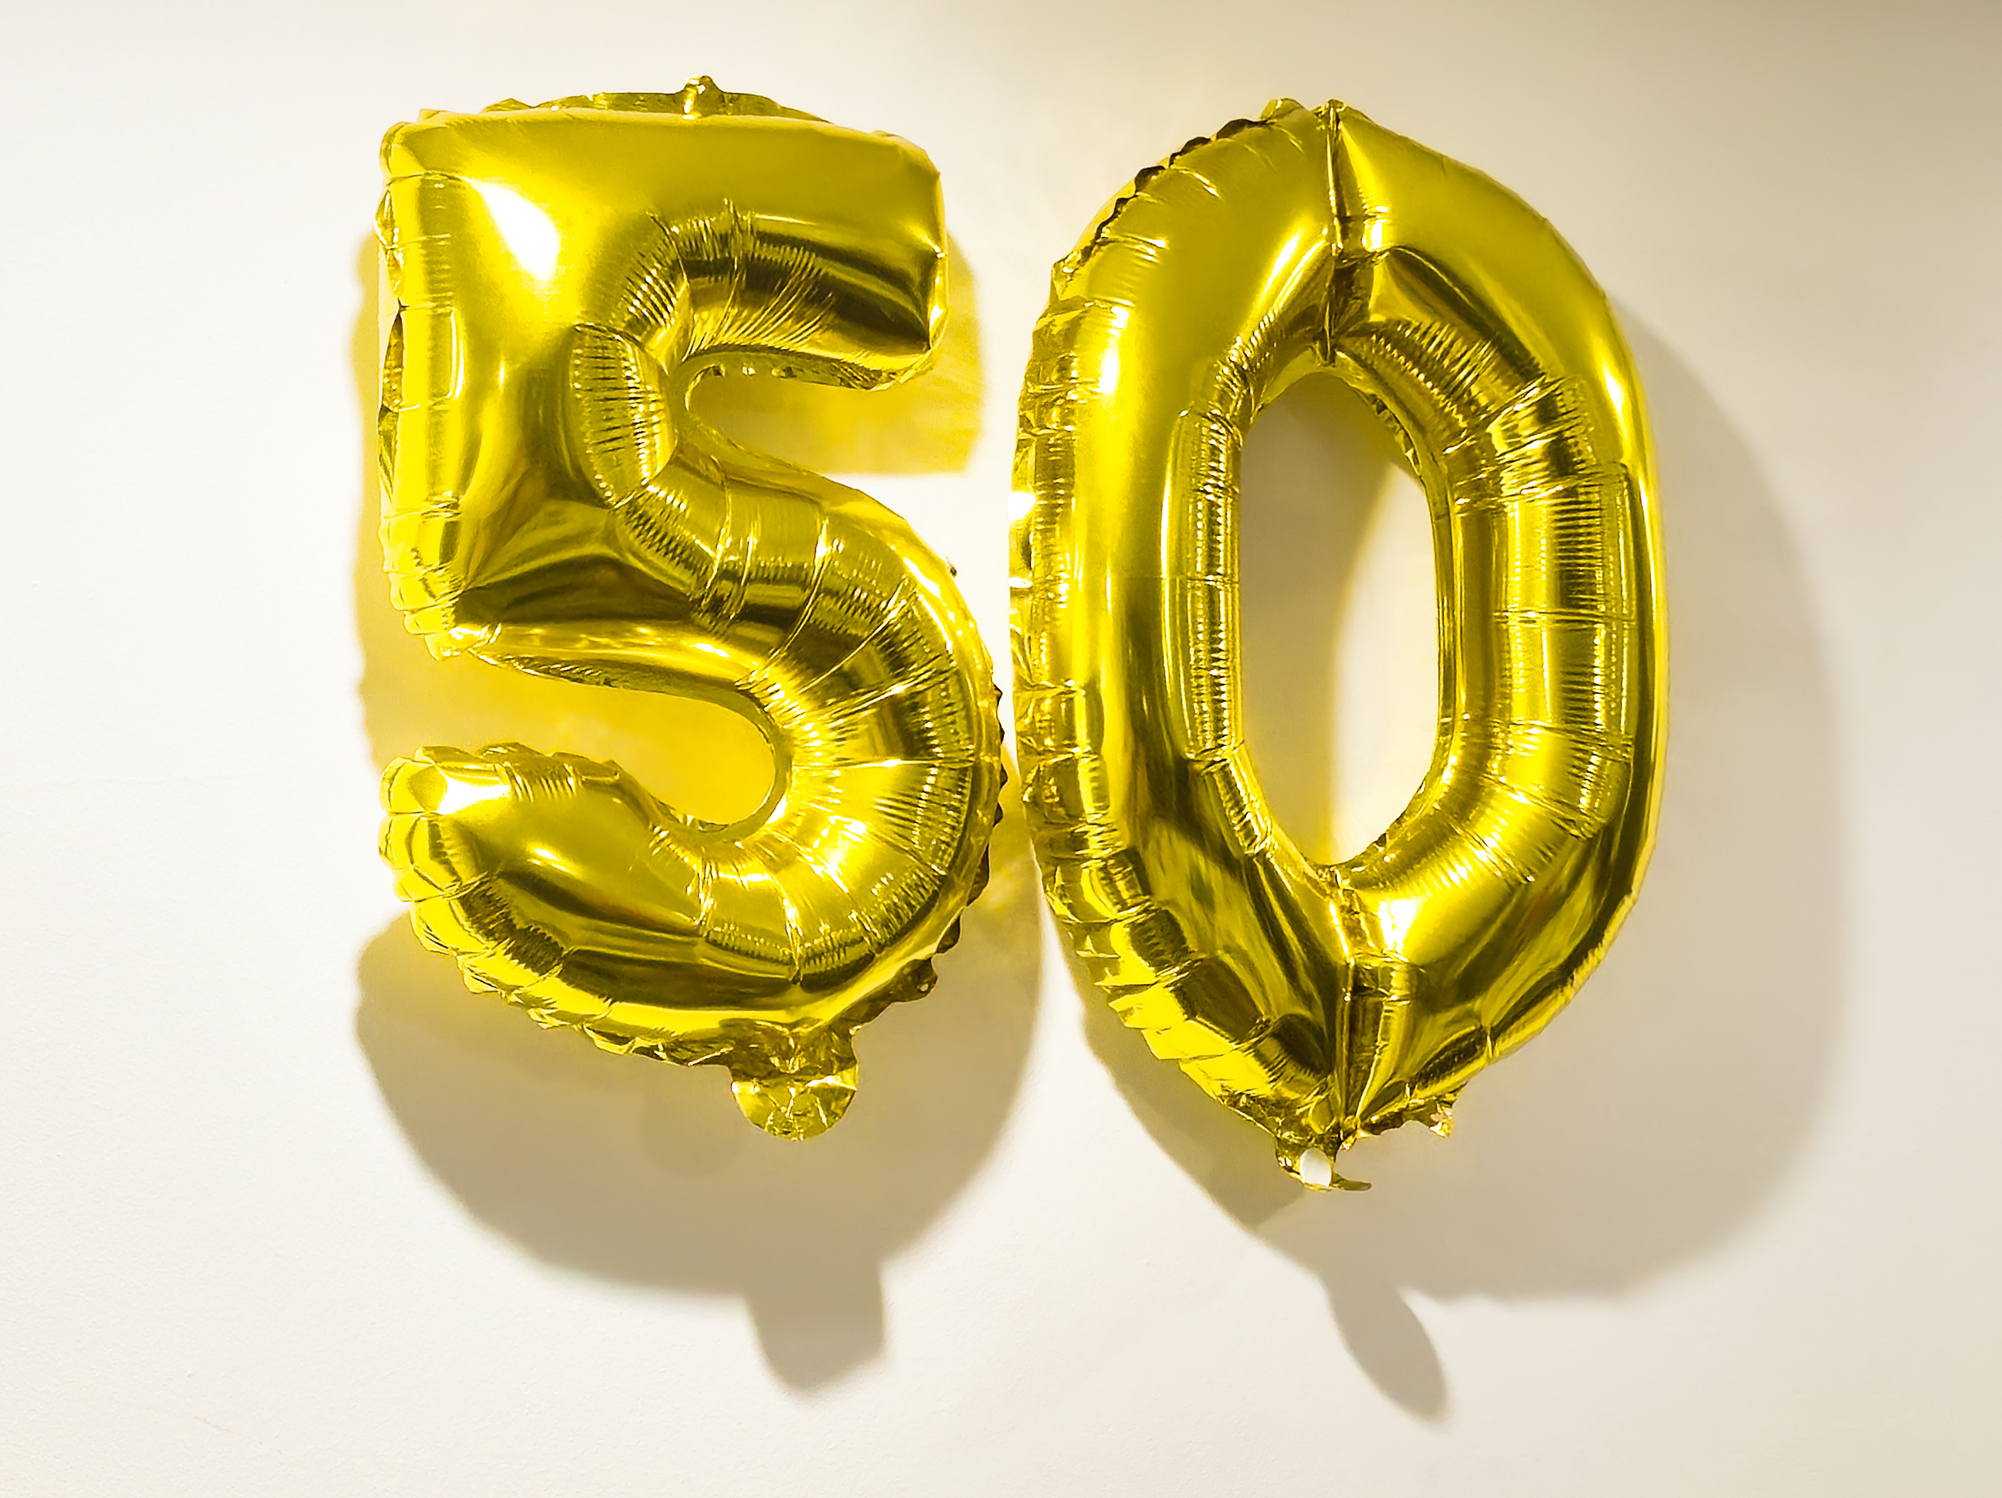 Two gold foil balloons shaped as the number 50 against a plain wall, likely symbolizing a milestone